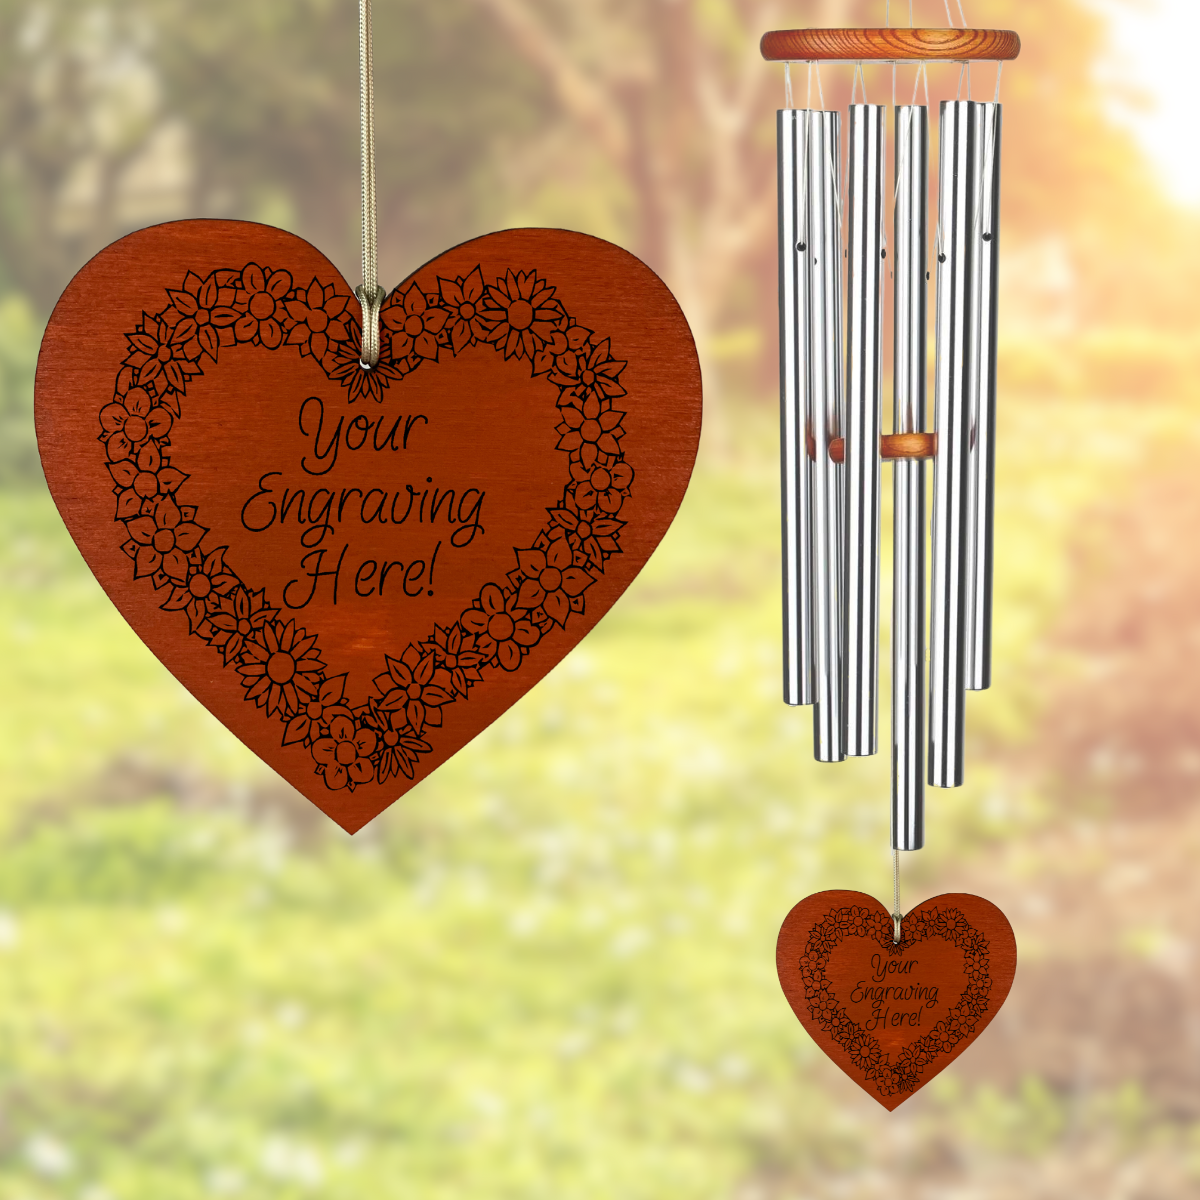 AMAZING GRACE SILVER 40 INCH WIND CHIME - ENGRAVABLE FLORAL WREATH HEART SAIL